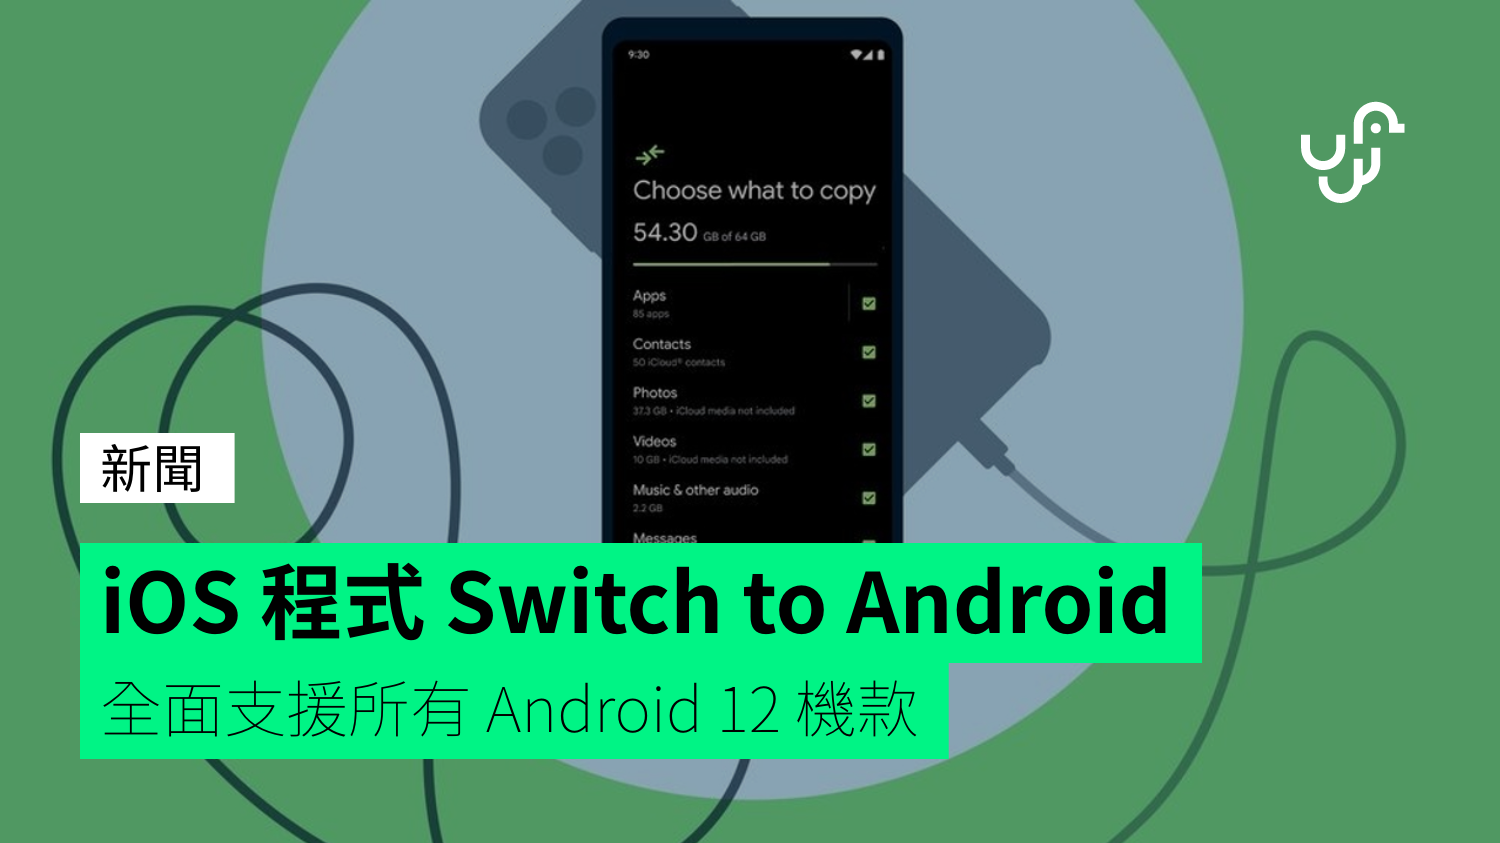 iOS app Switch to Android fully supports all Android 12 models